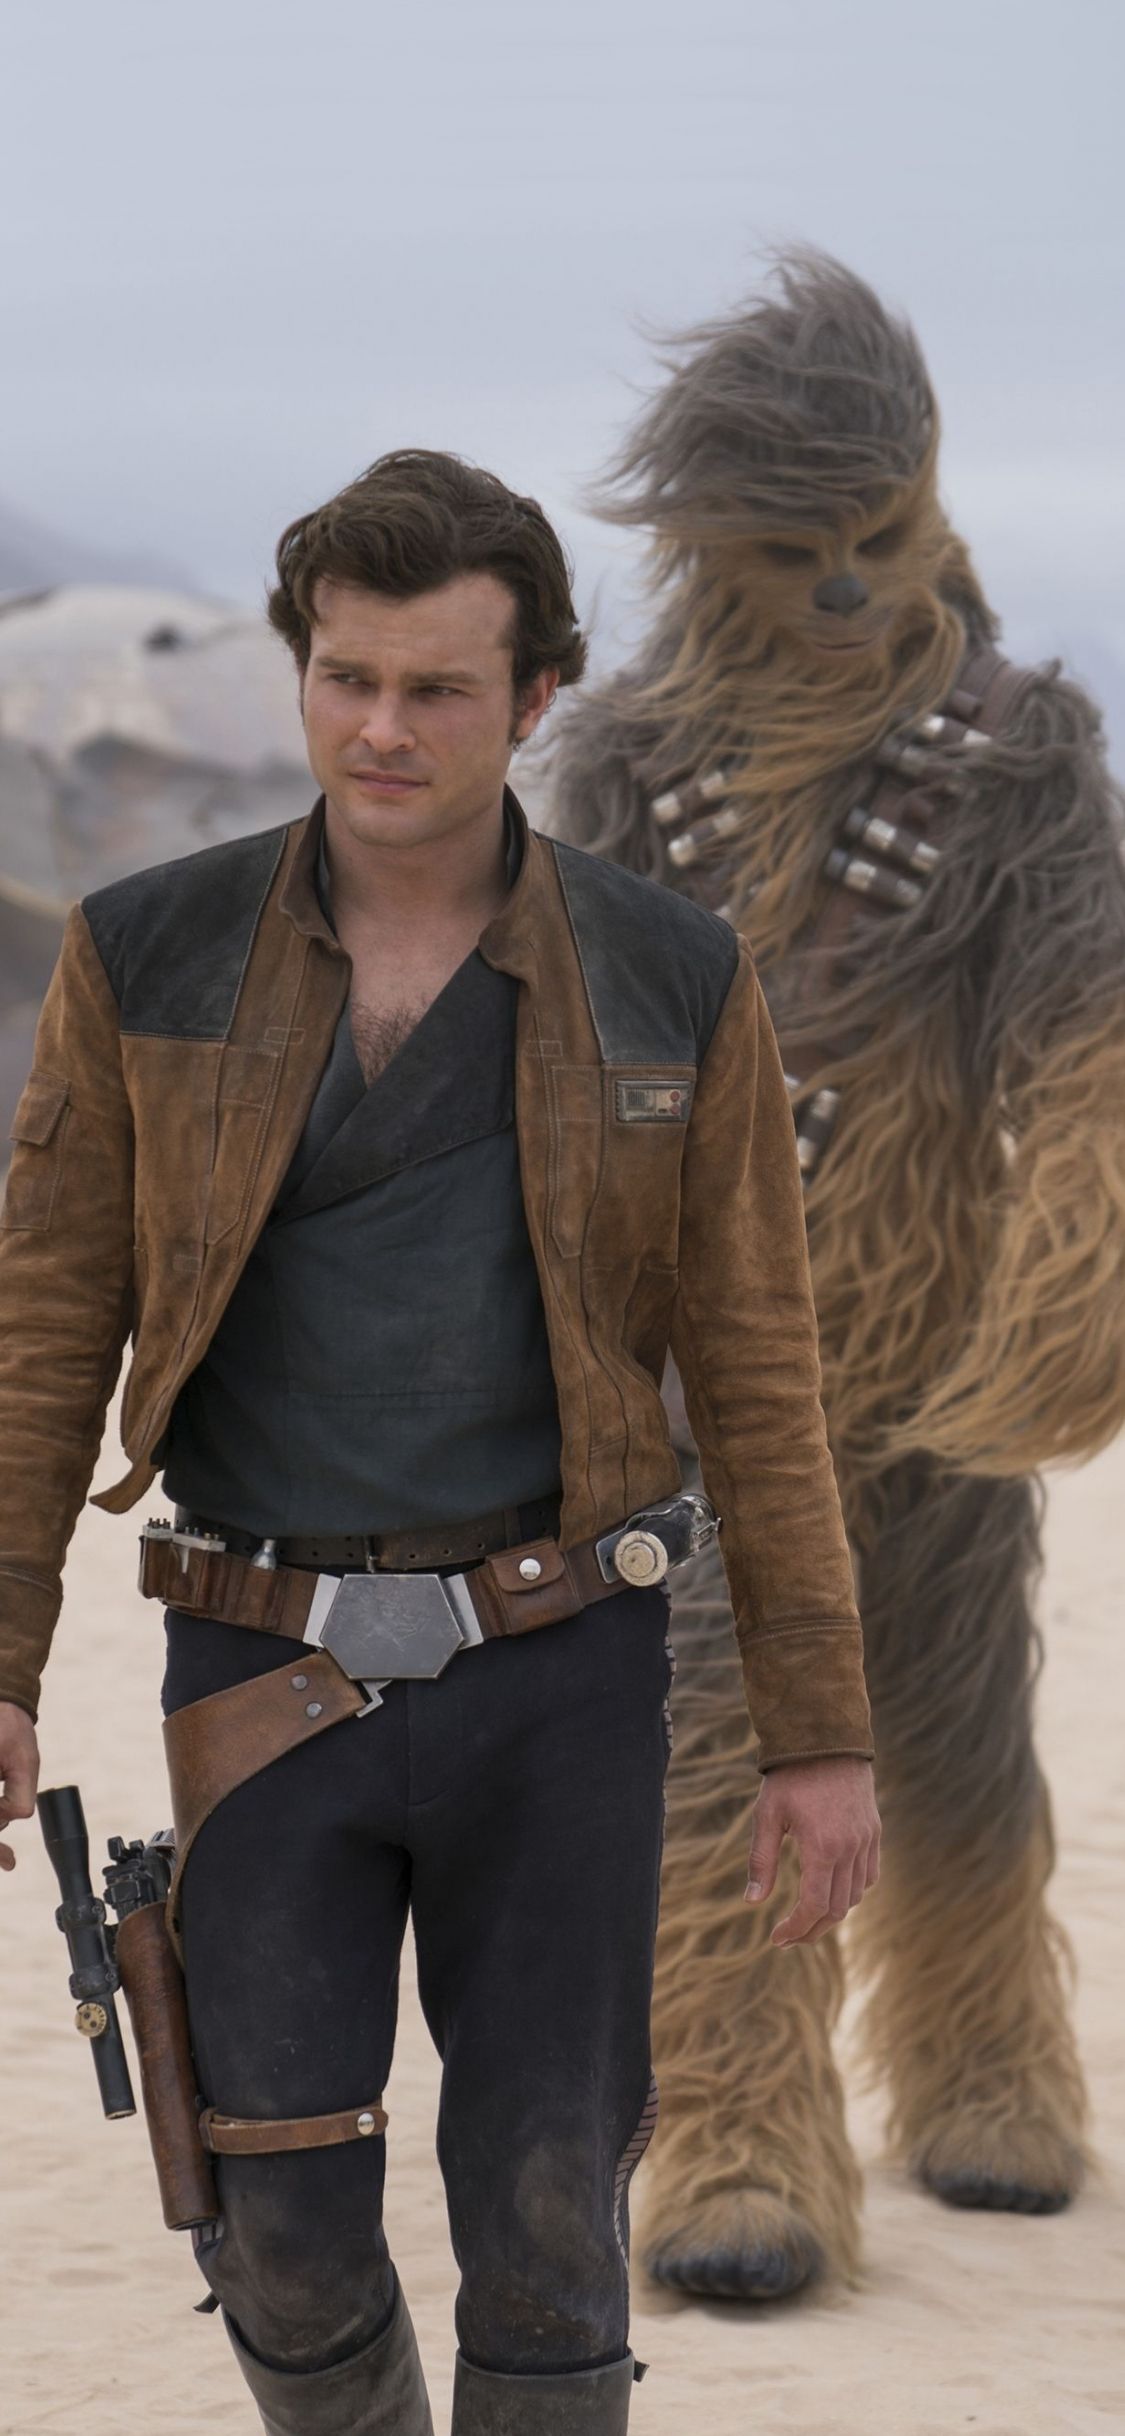 Download 1125x2436 wallpaper han solo and chewbacca, movie, 2018